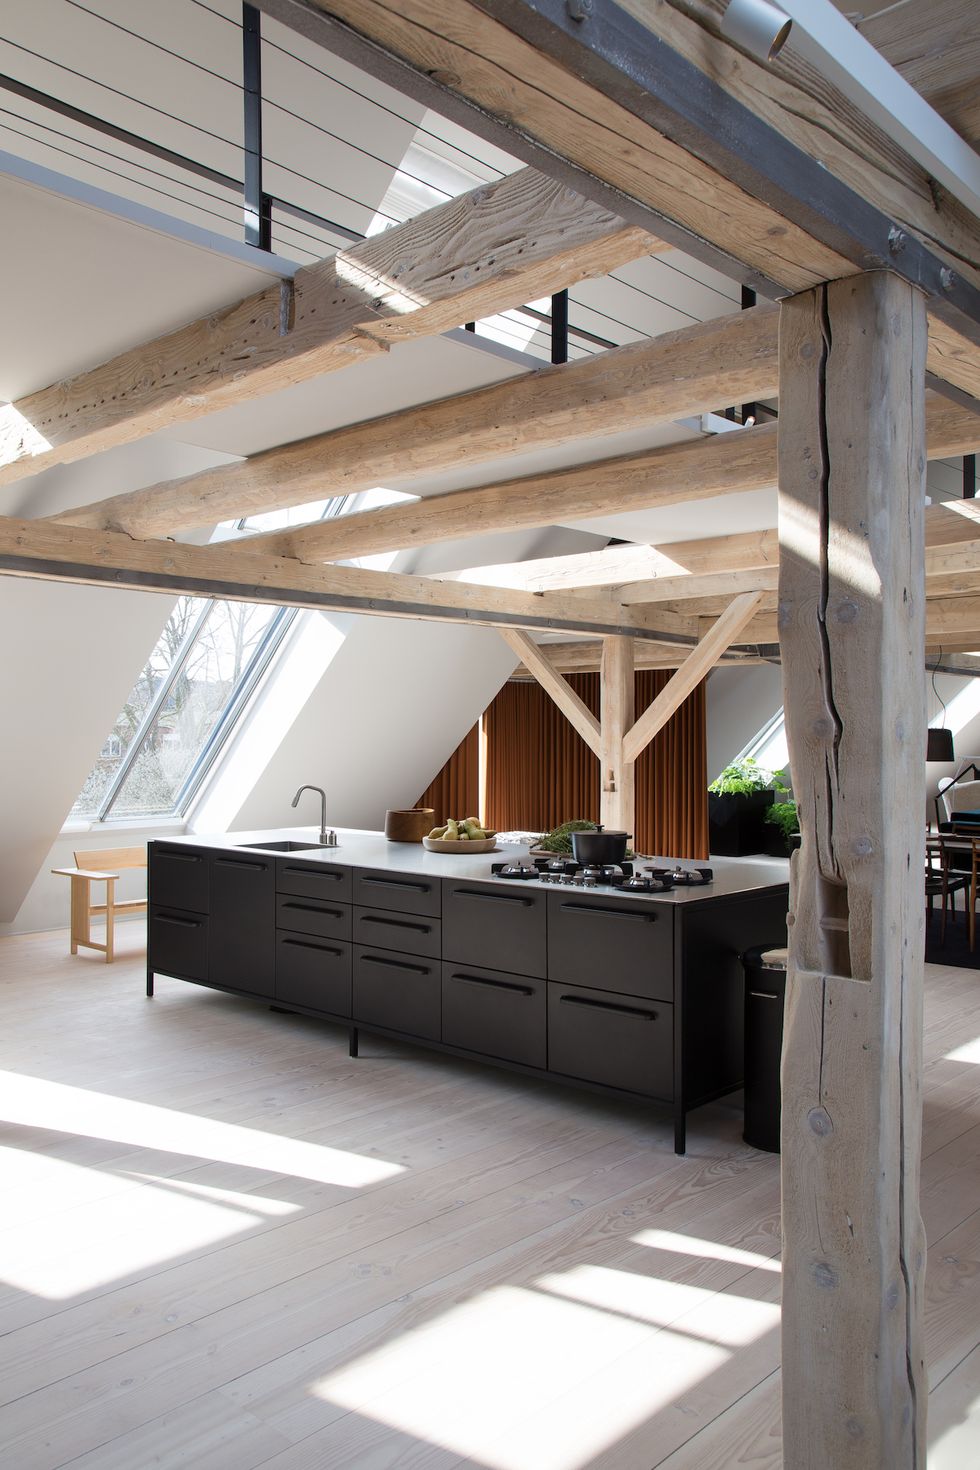 Beam, Property, Building, Room, Floor, Wood, Architecture, Ceiling, Daylighting, Design, 